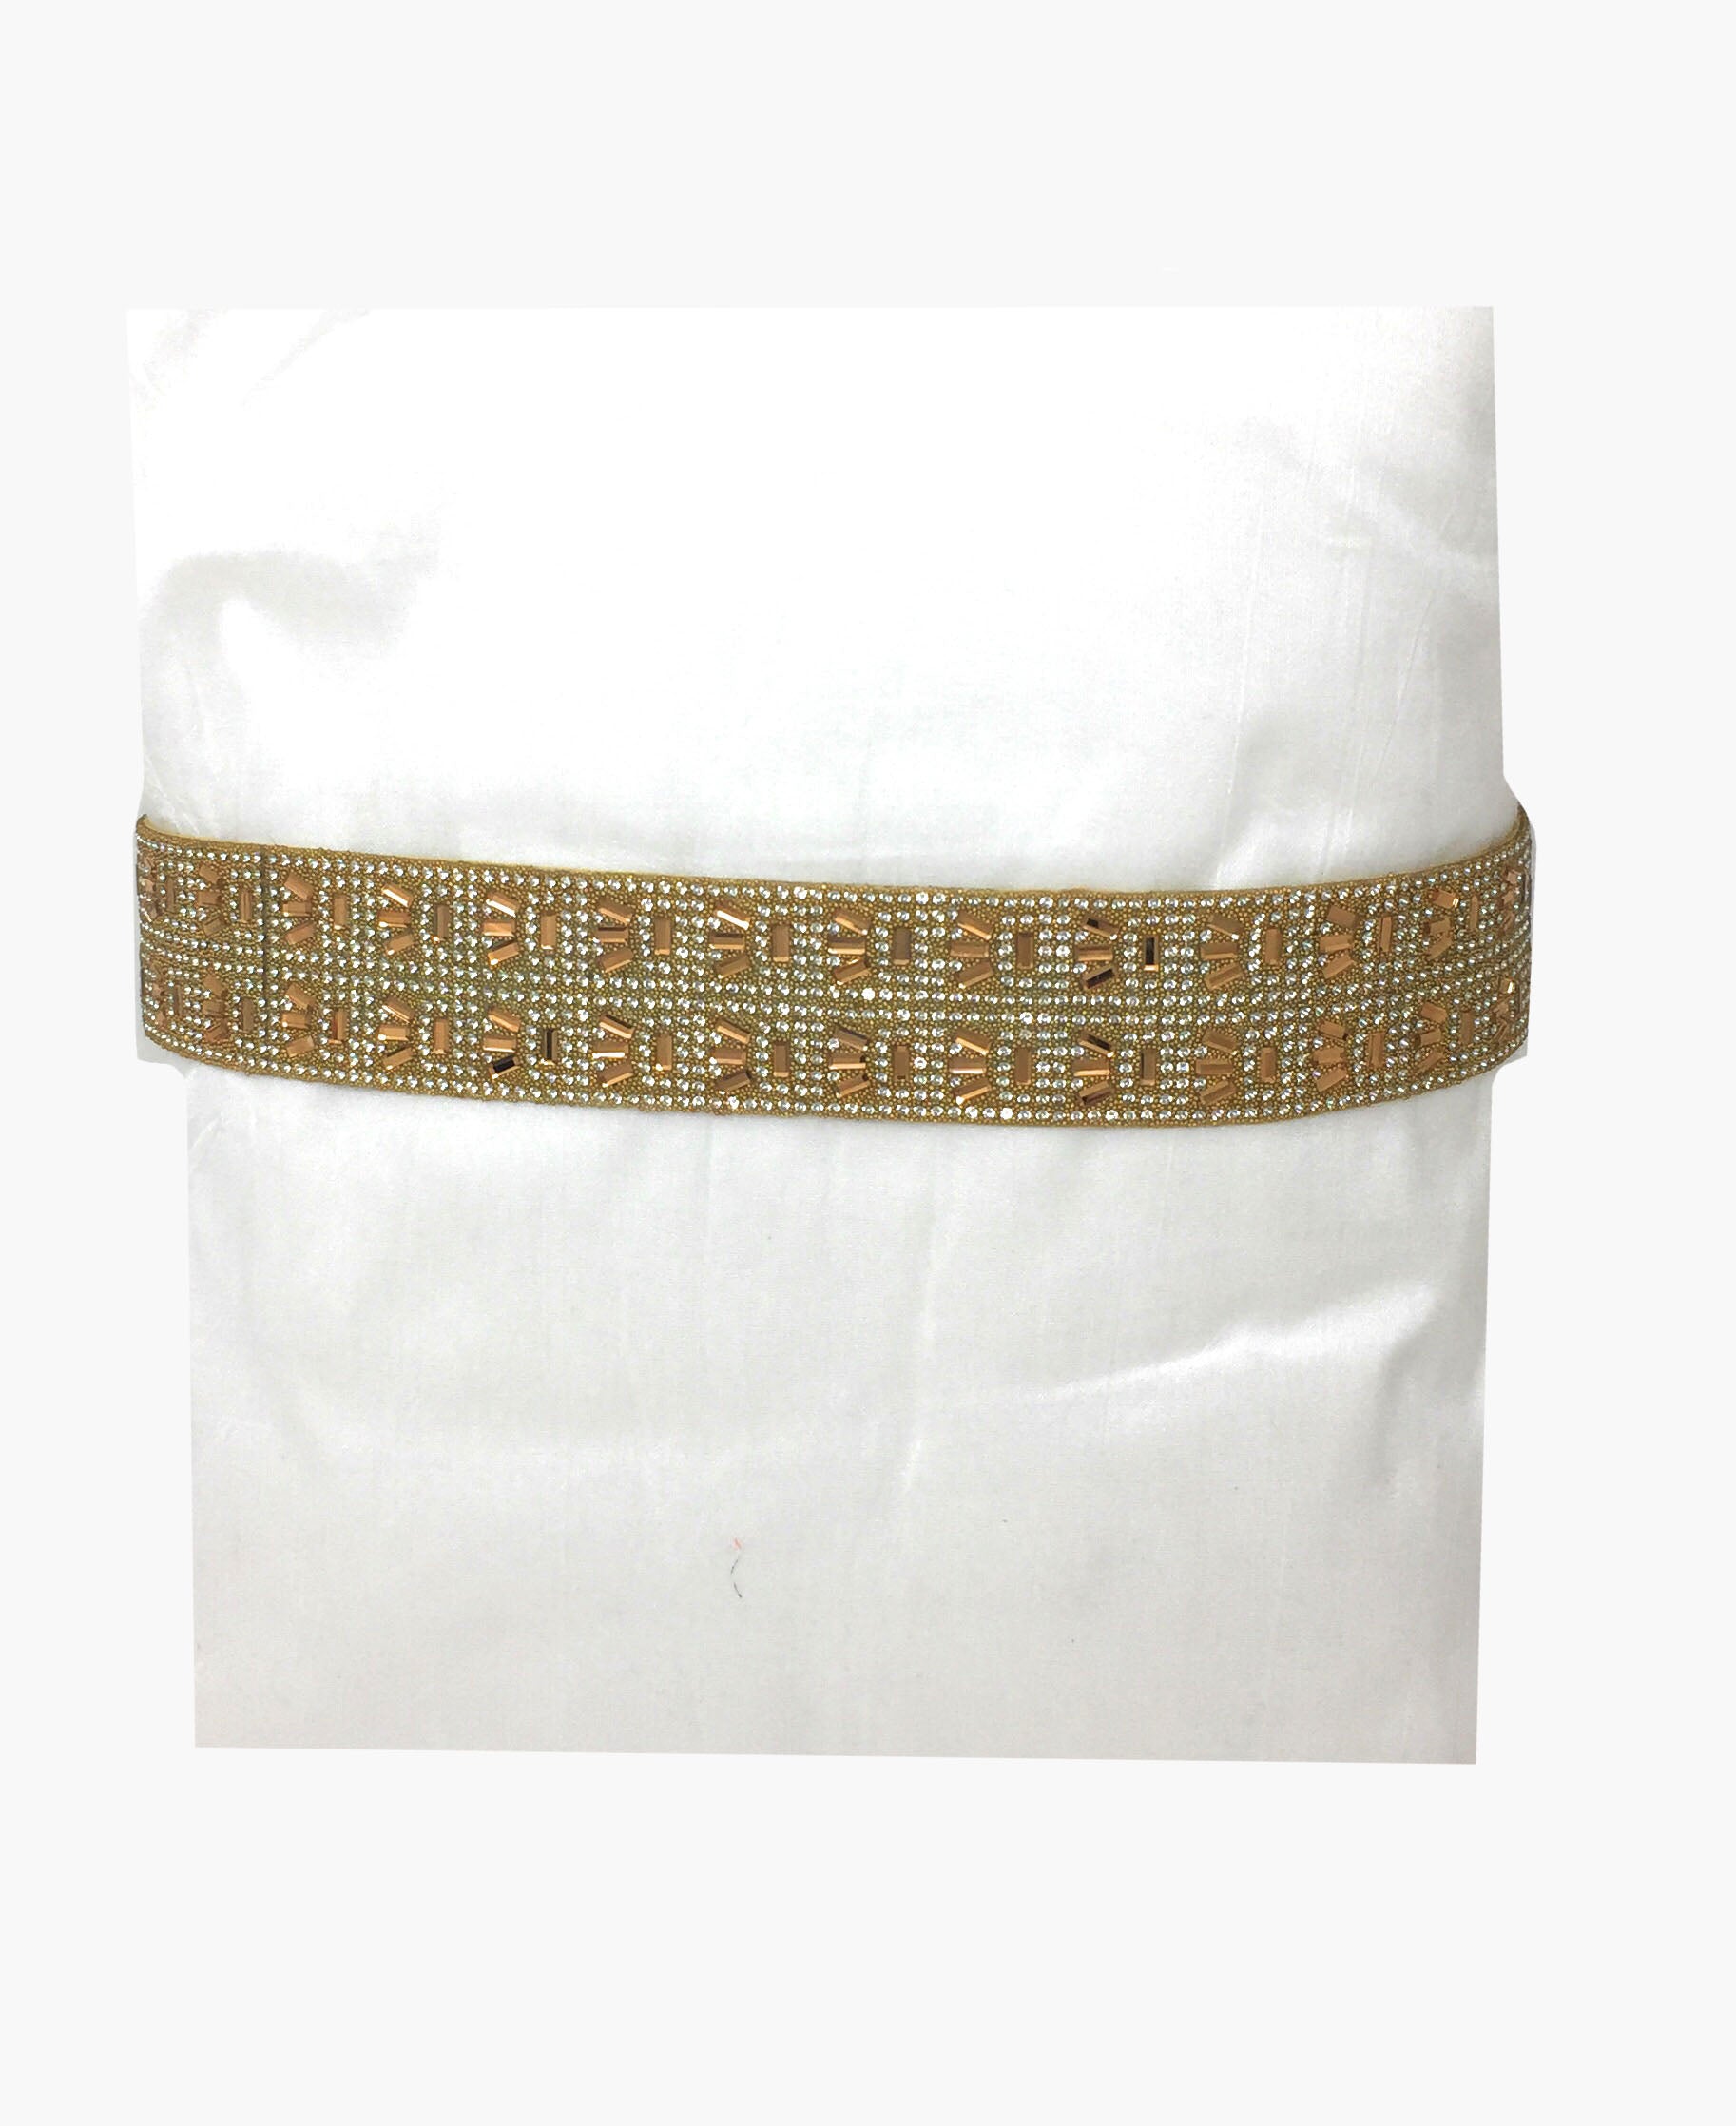 Exclusive Simple Golden Chained Waist Belt Kamarband Belly Hips Chain -  SHREEVARAM - 3227492